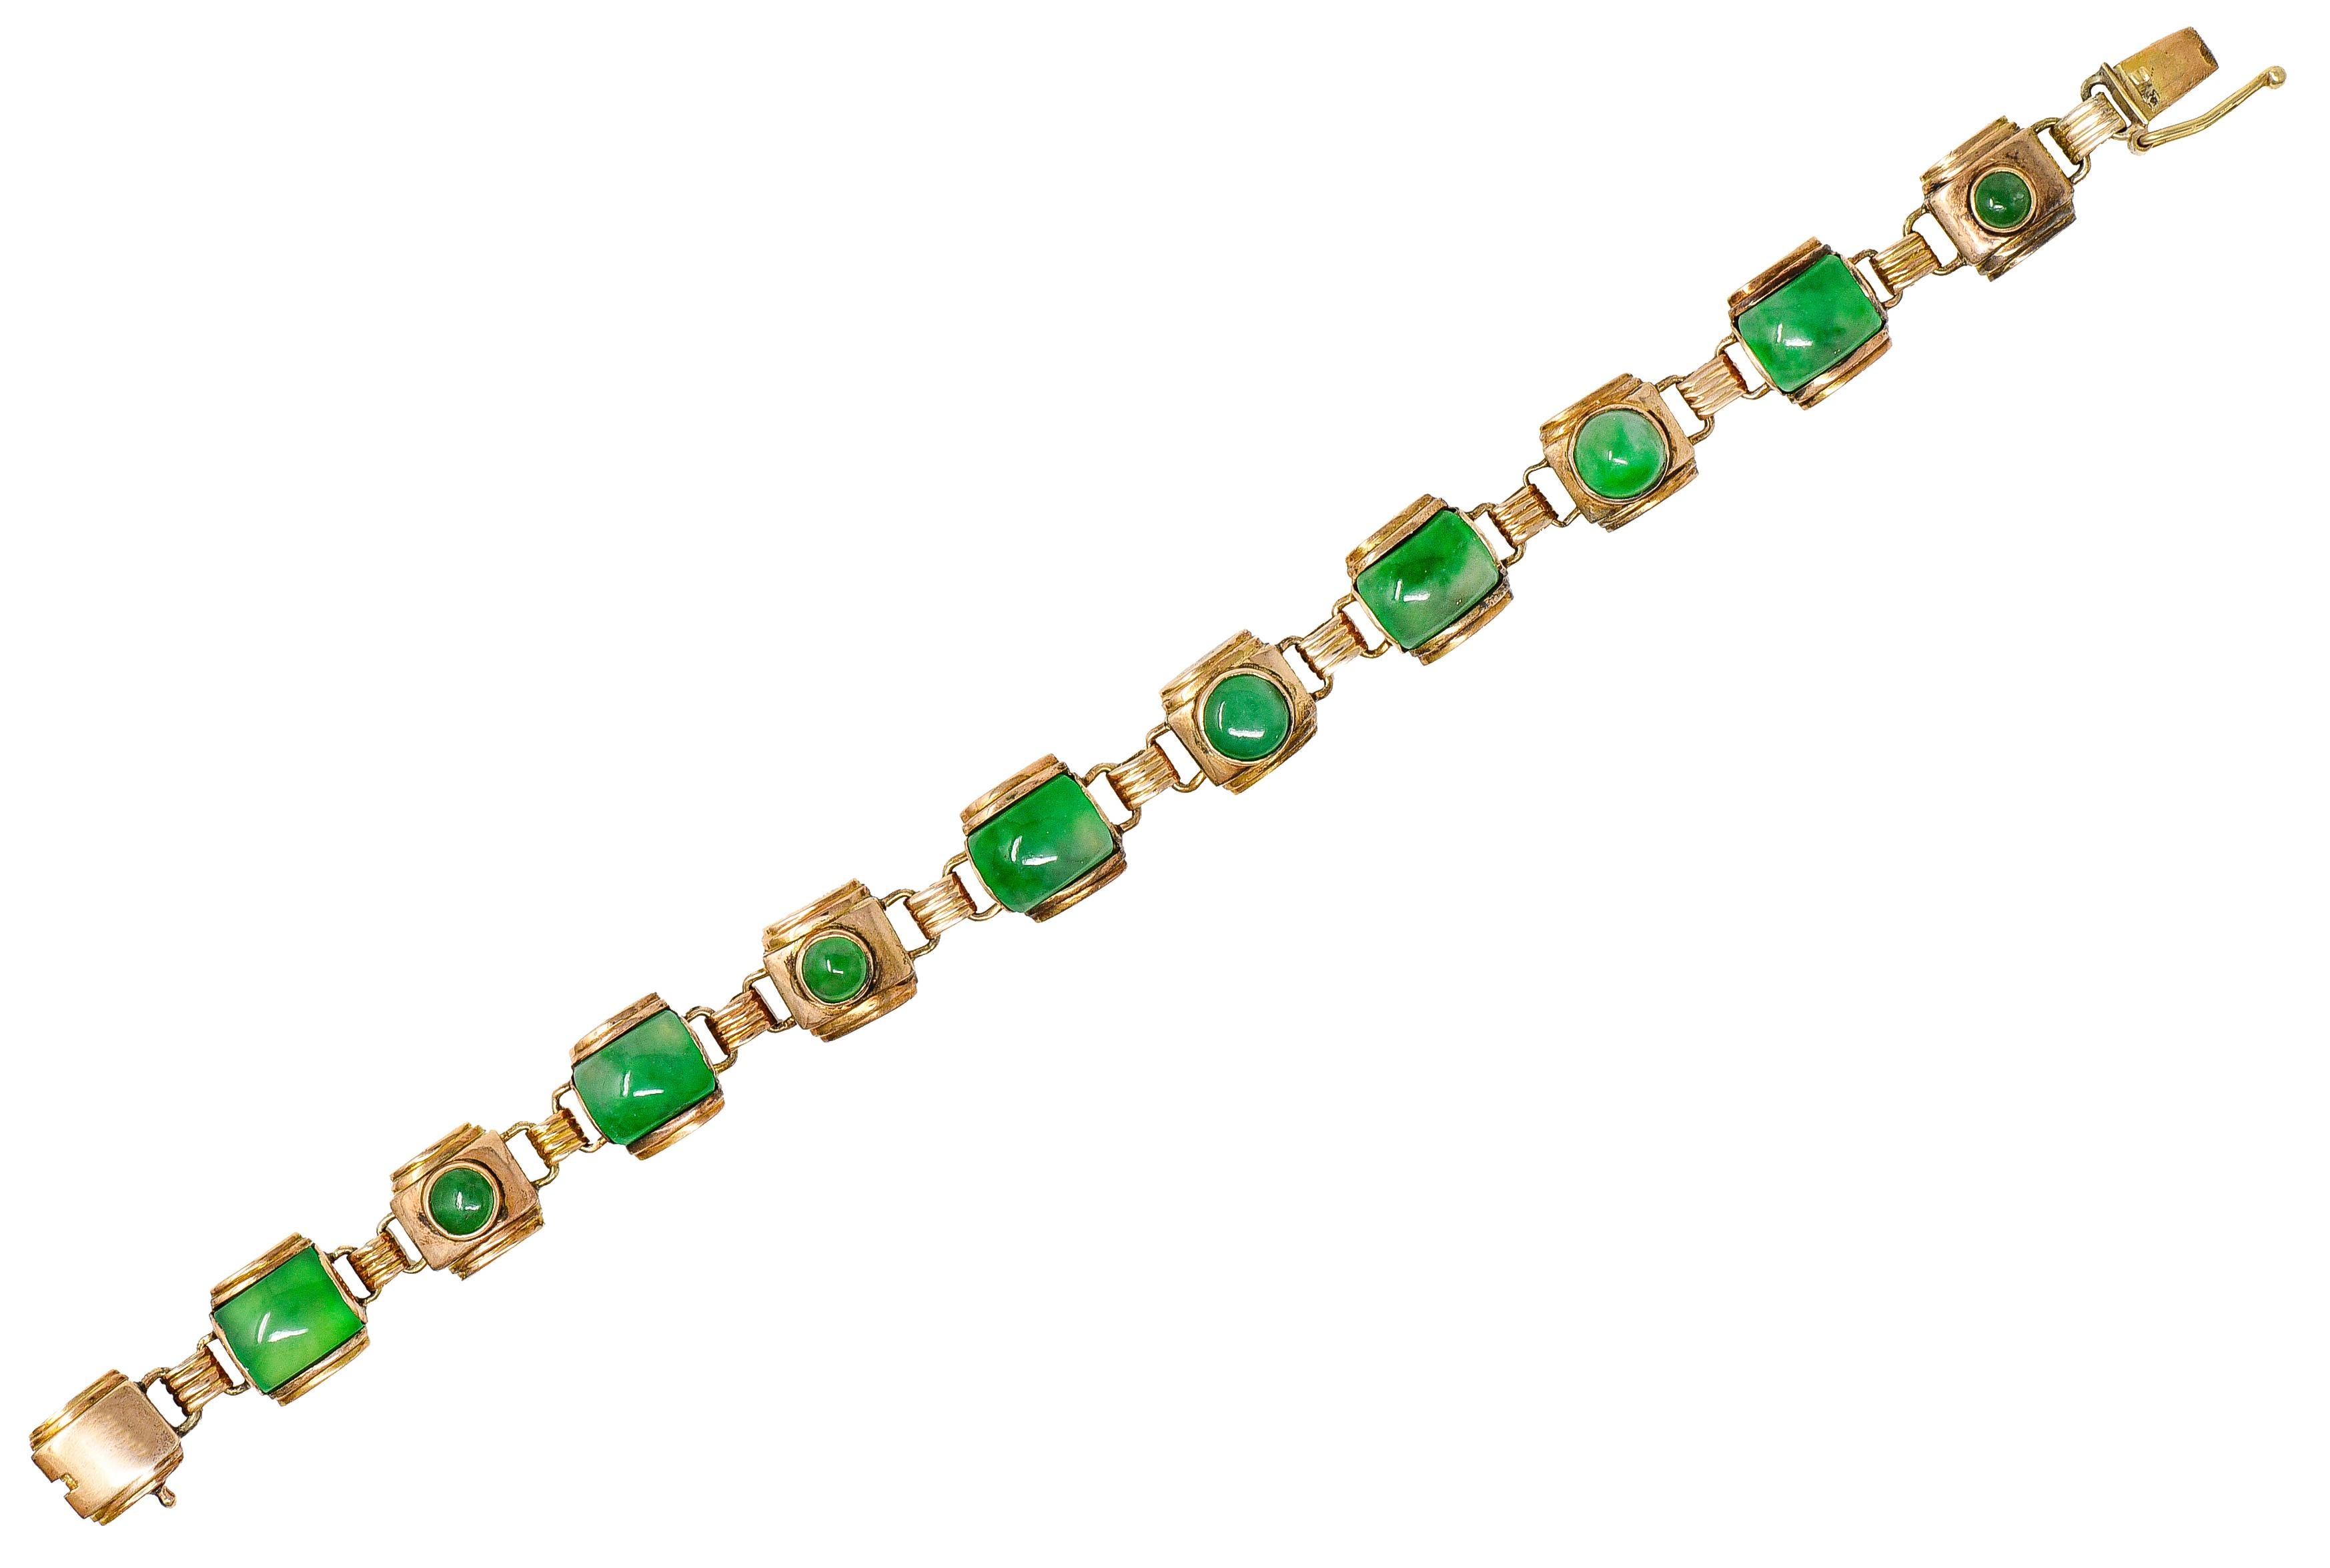 Bracelet is comprised of cushion formed links alternating with spacer links. All are brightly polished with a deeply ridged texture throughout. Featuring round and calibrè cut jadeite jade cabochons - varied in size. Translucent and strongly mottled